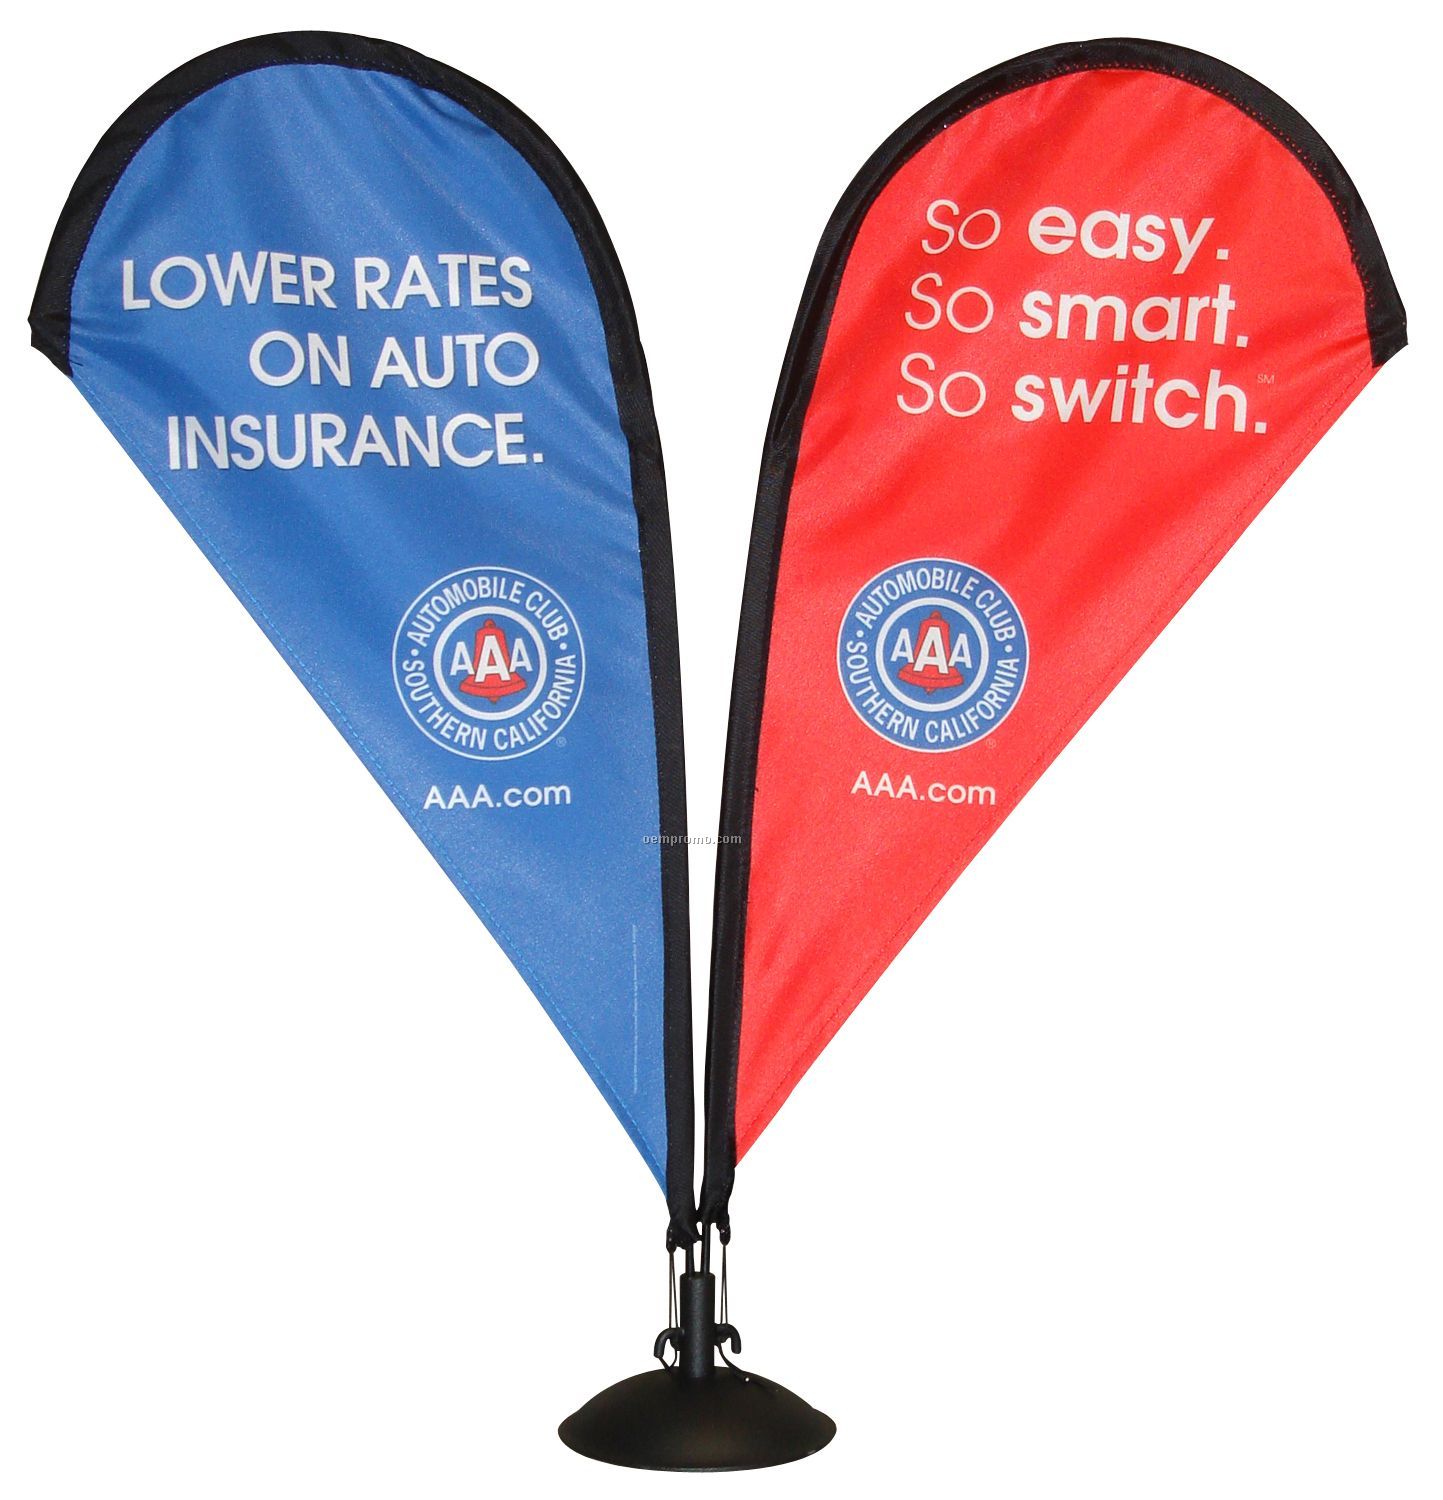 19" Table Top Double Sided Teardrop Banner & Stand